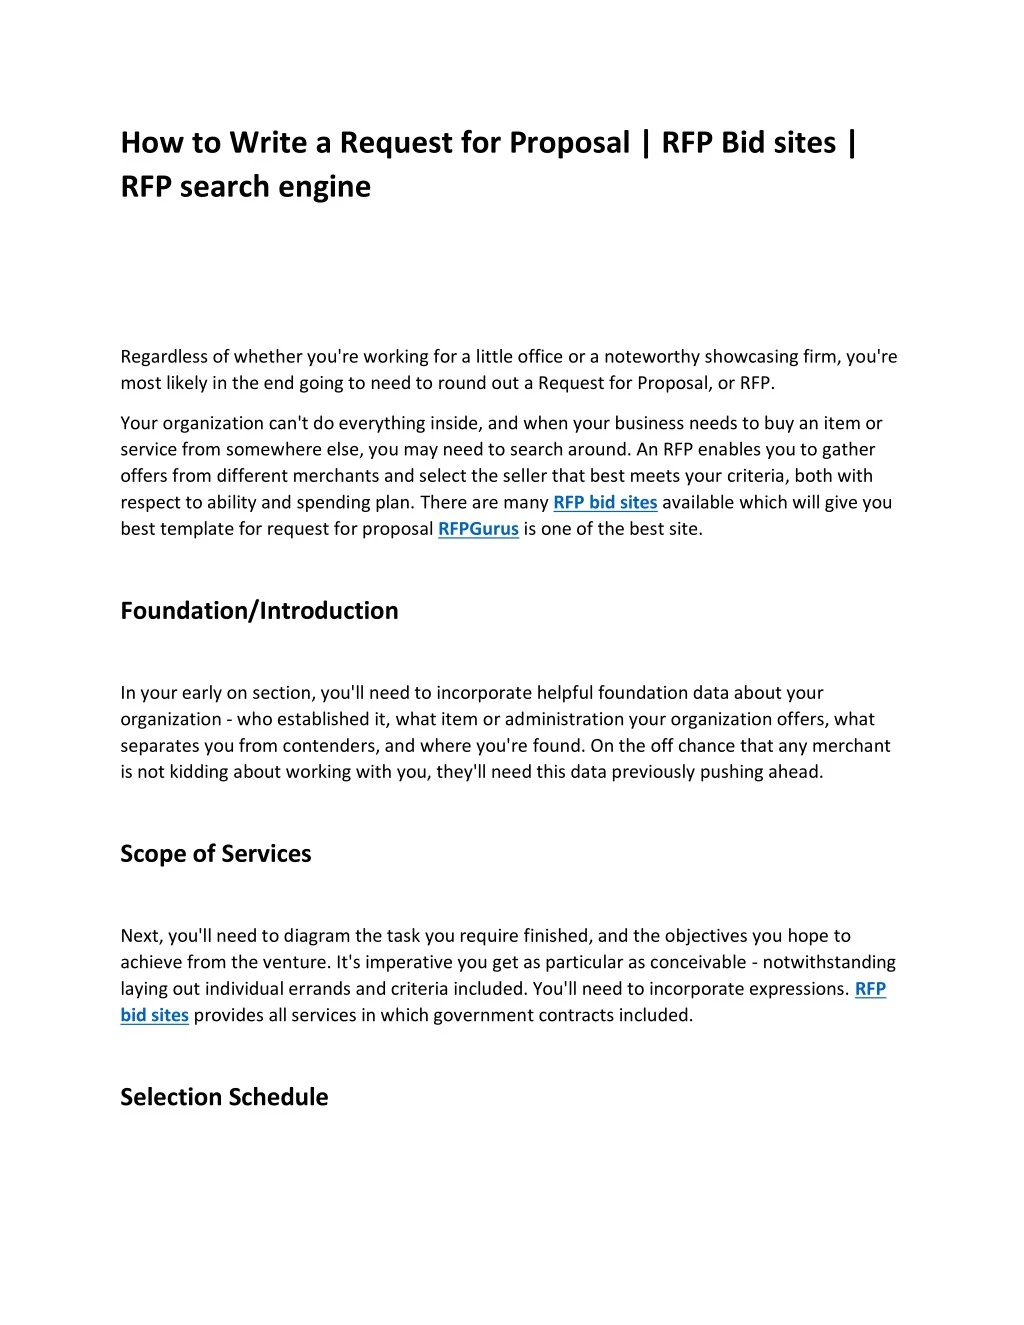 how to write a request for proposal rfp bid sites